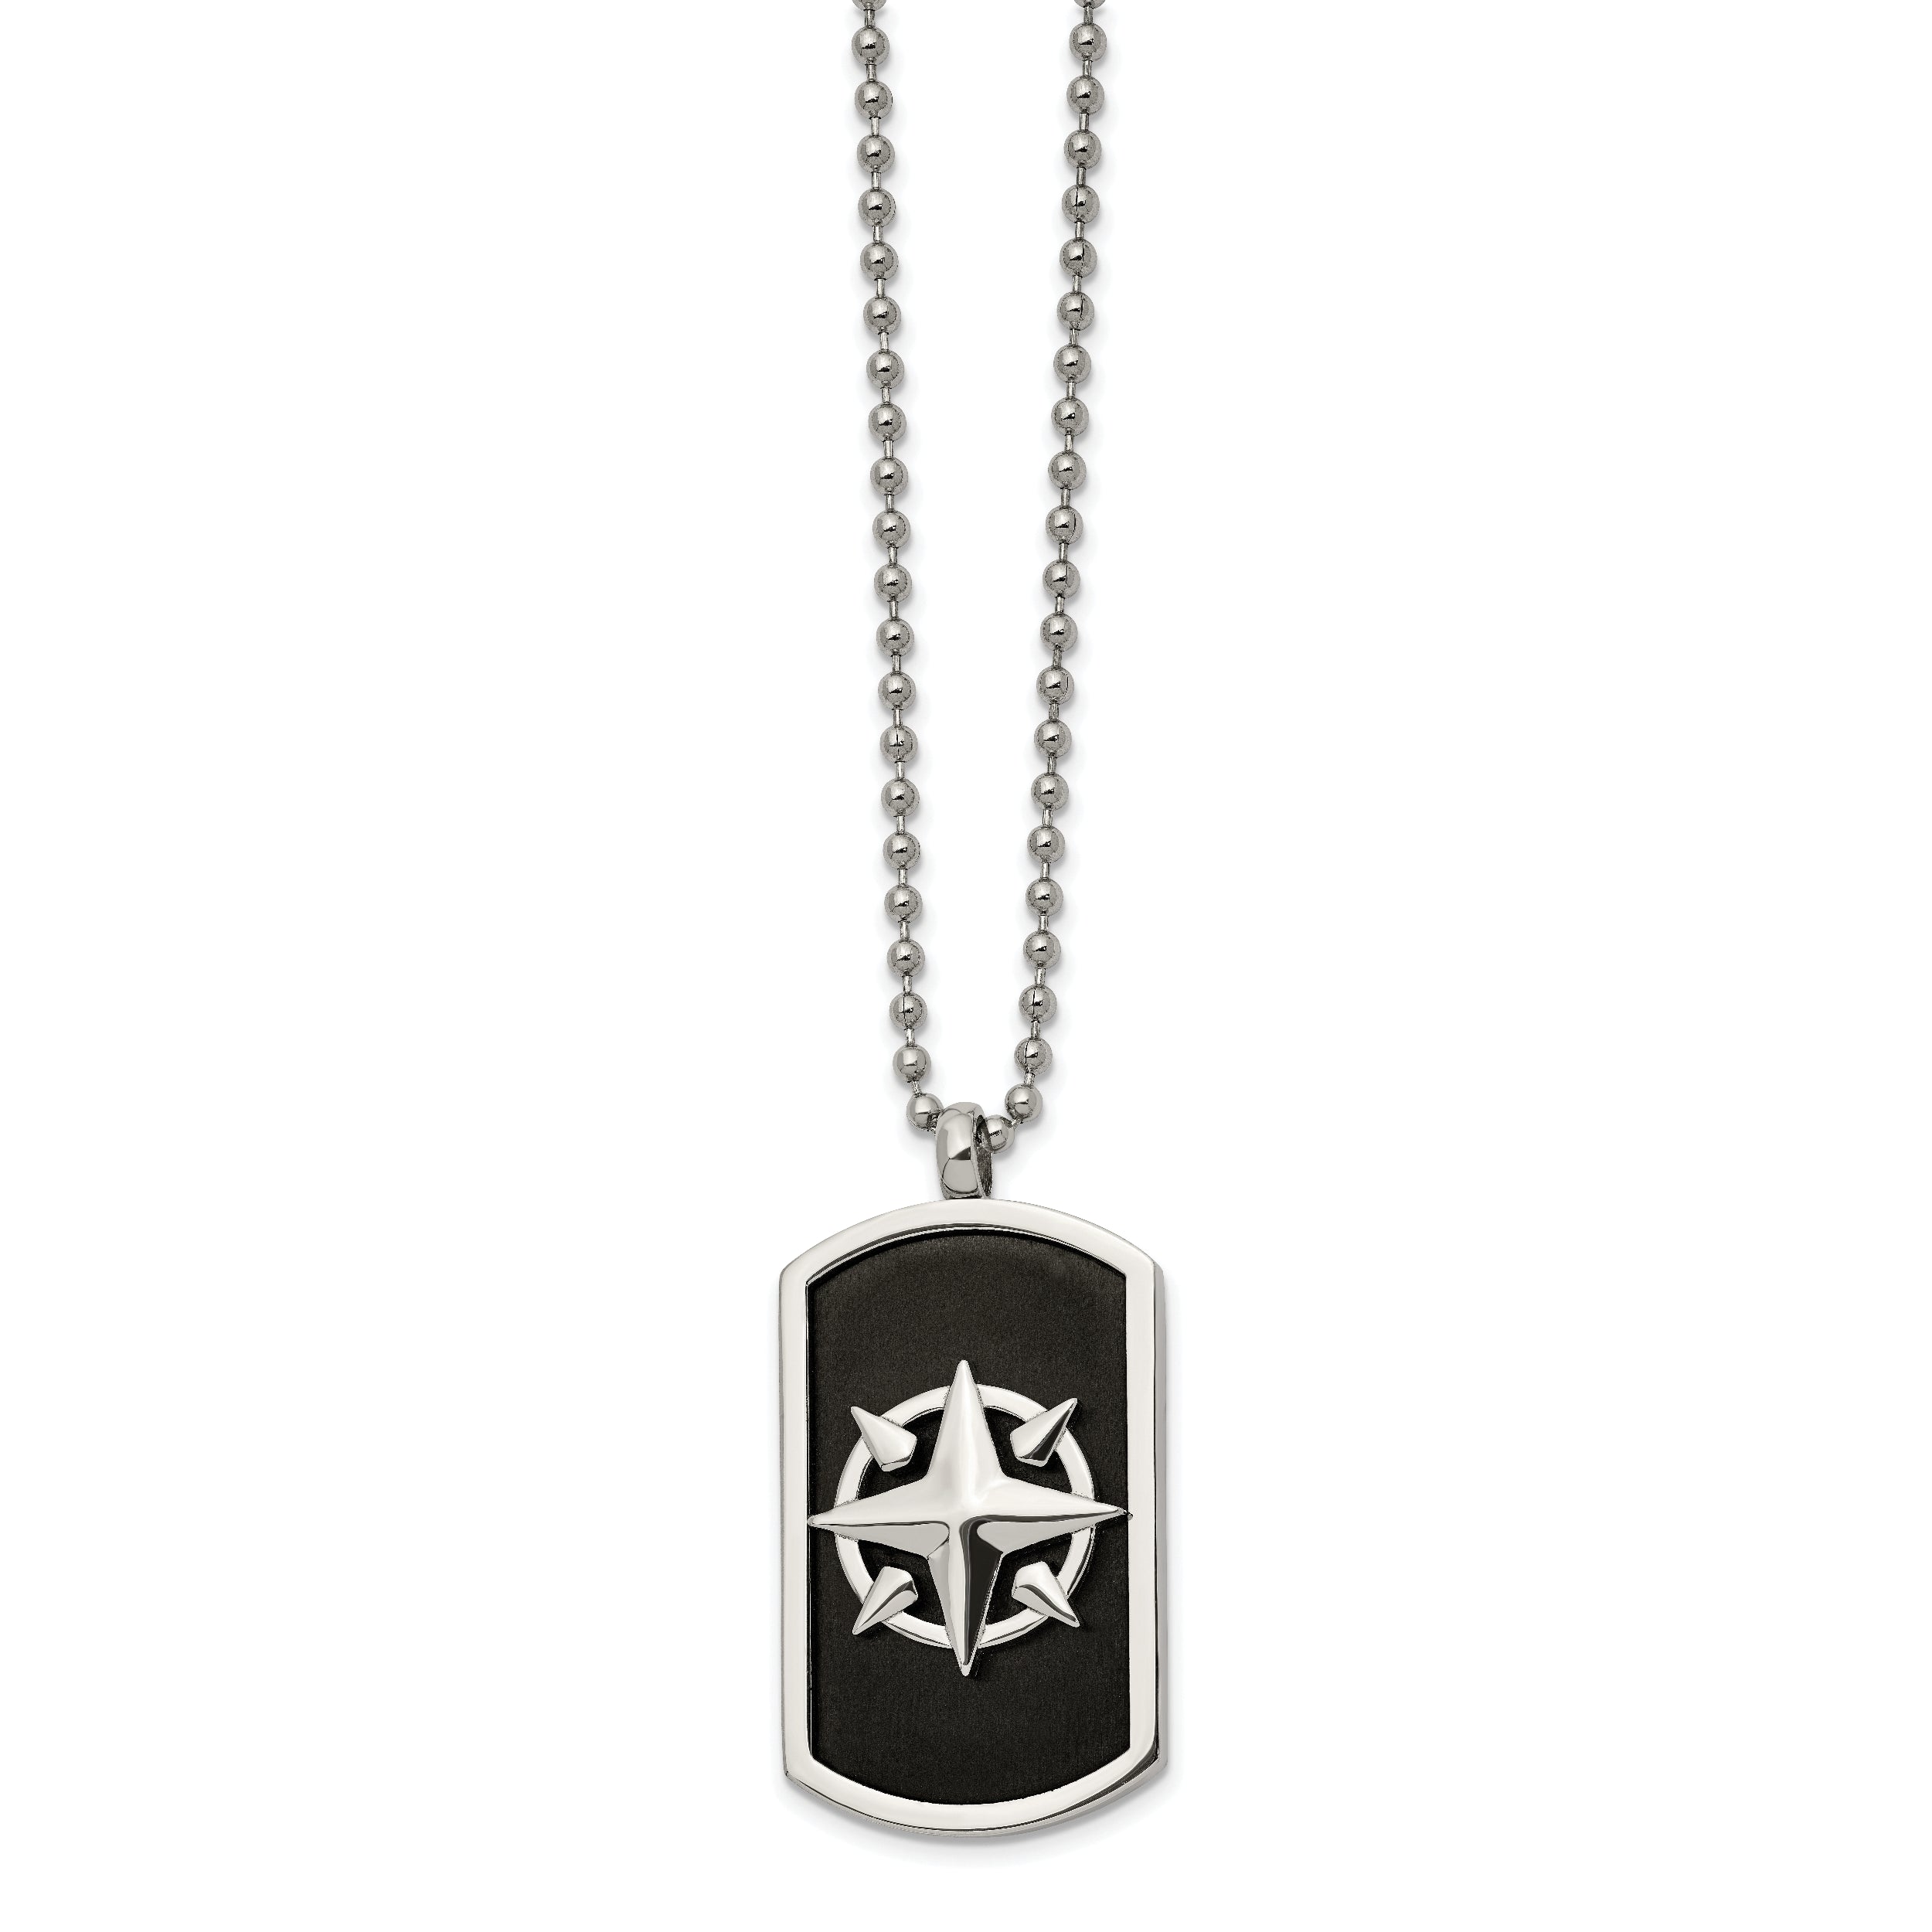 Chisel Stainless Steel Brushed and Polished Black IP-plated Compass Dog Tag on a 24 inch Ball Chain Necklace